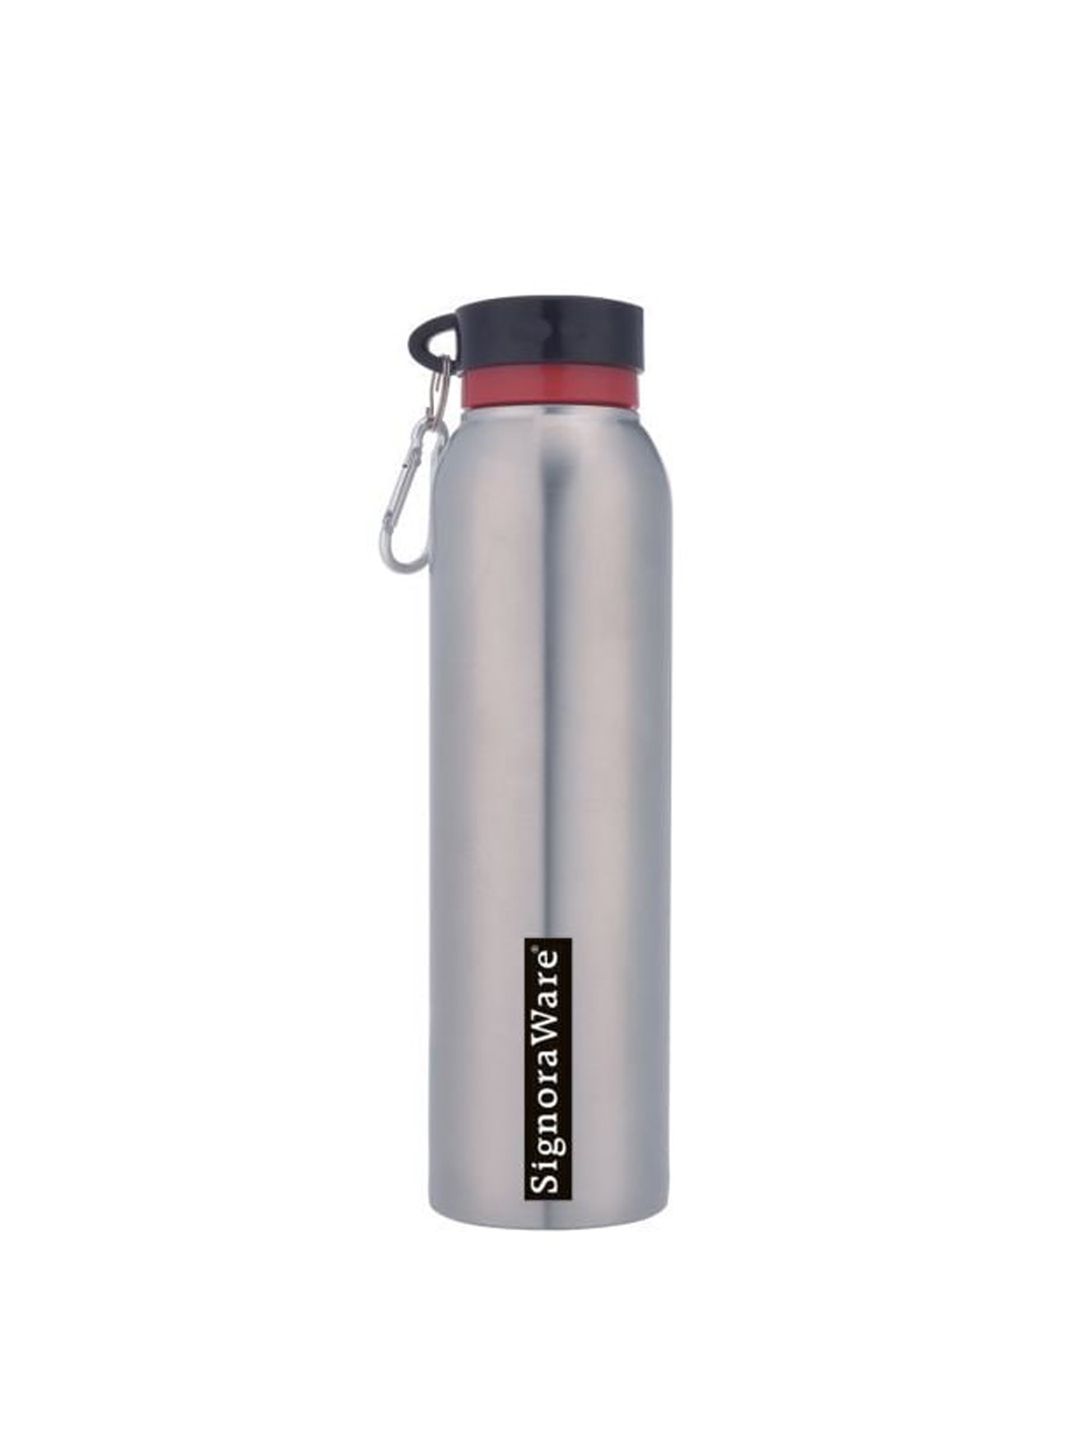 SignoraWare Silver-Toned Solid 1 Ltr Stainless Steel Water Bottle Price in India